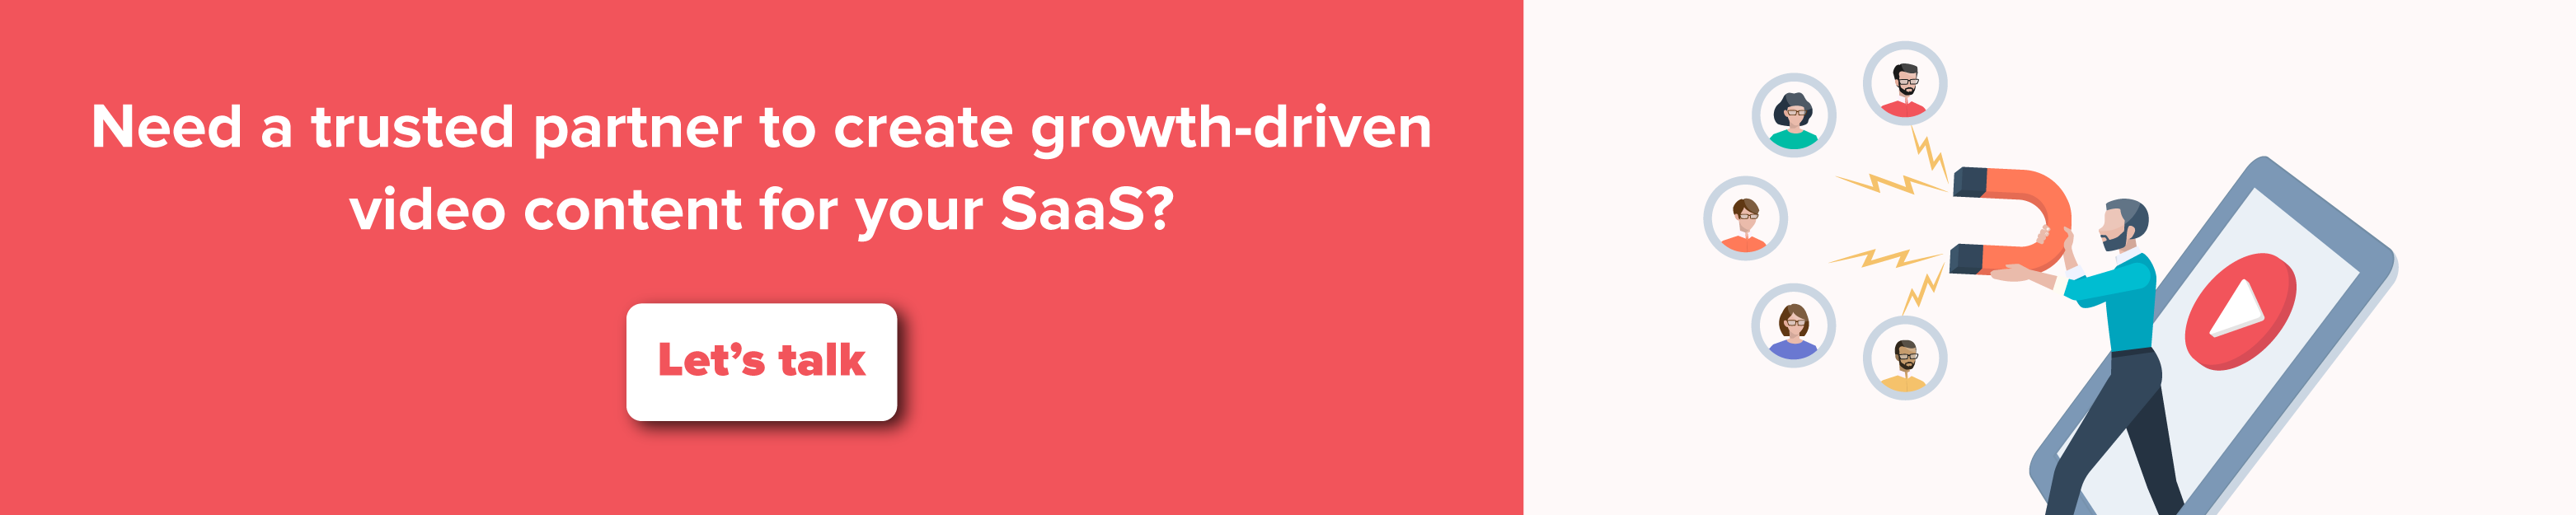 Need-a-trusted-partner-to-create-growth-driven-video-content-for-your-SaaS?